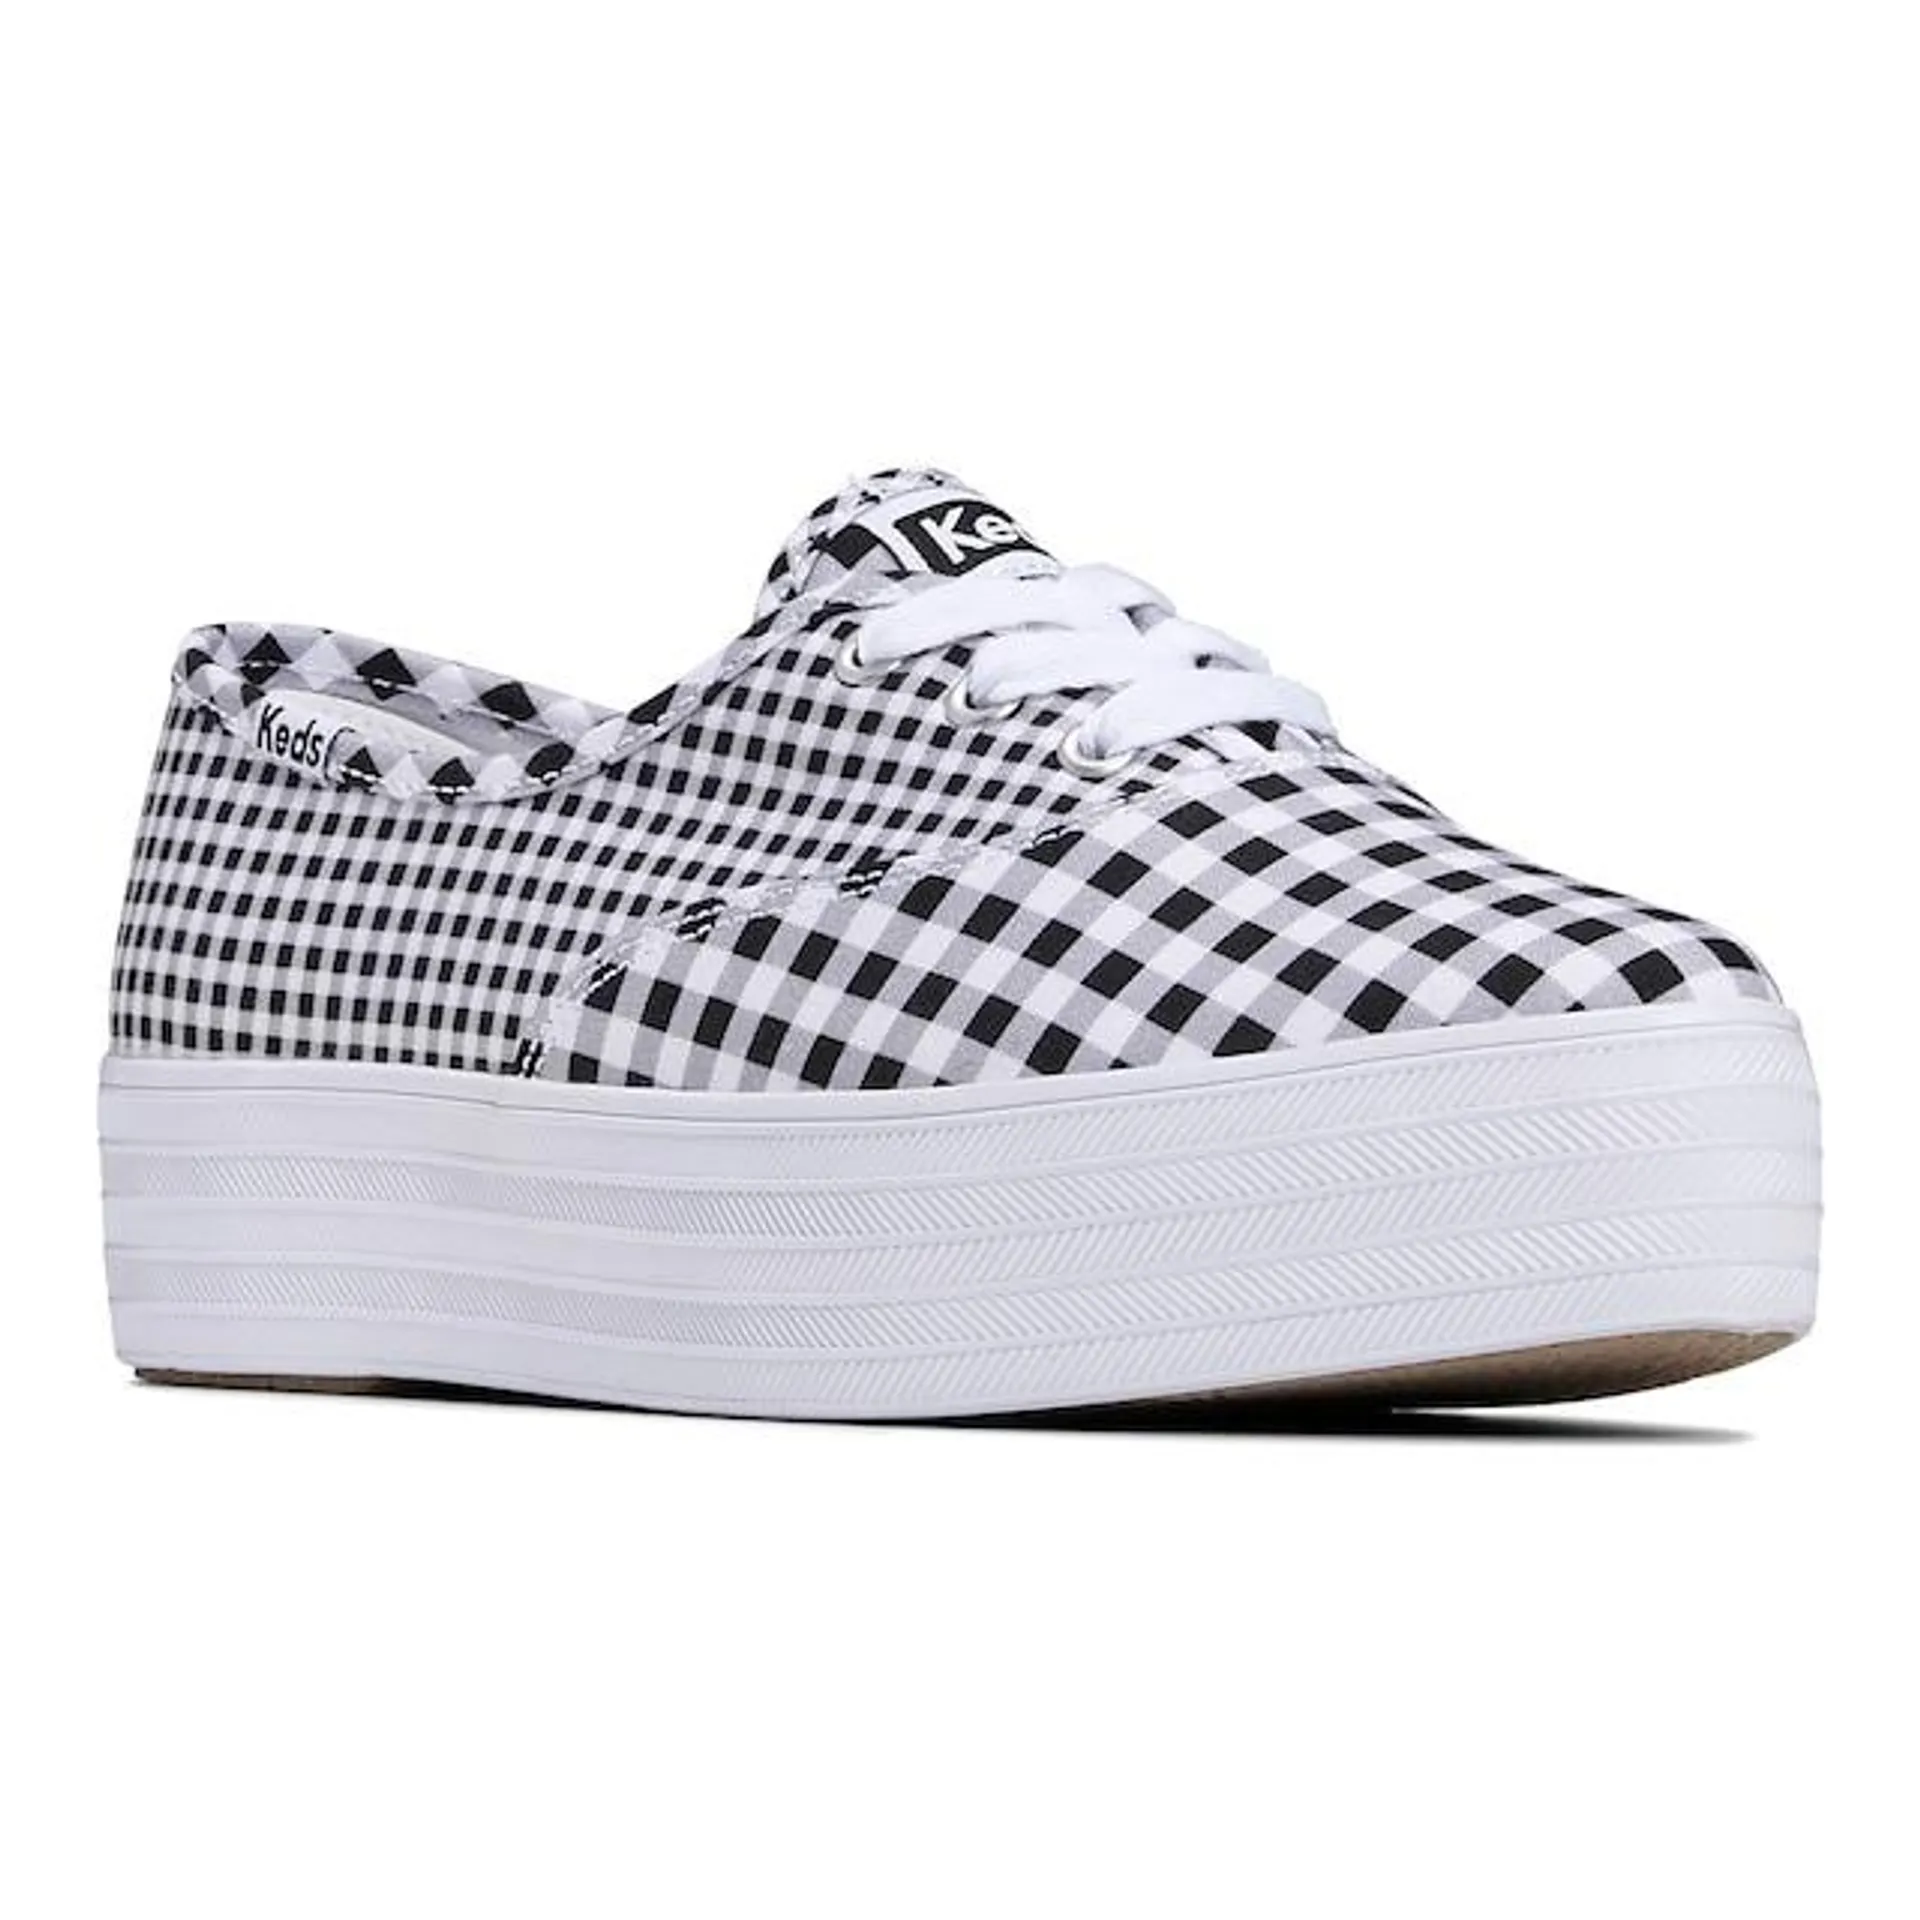 Keds Point Canvas Gingham Lace Up